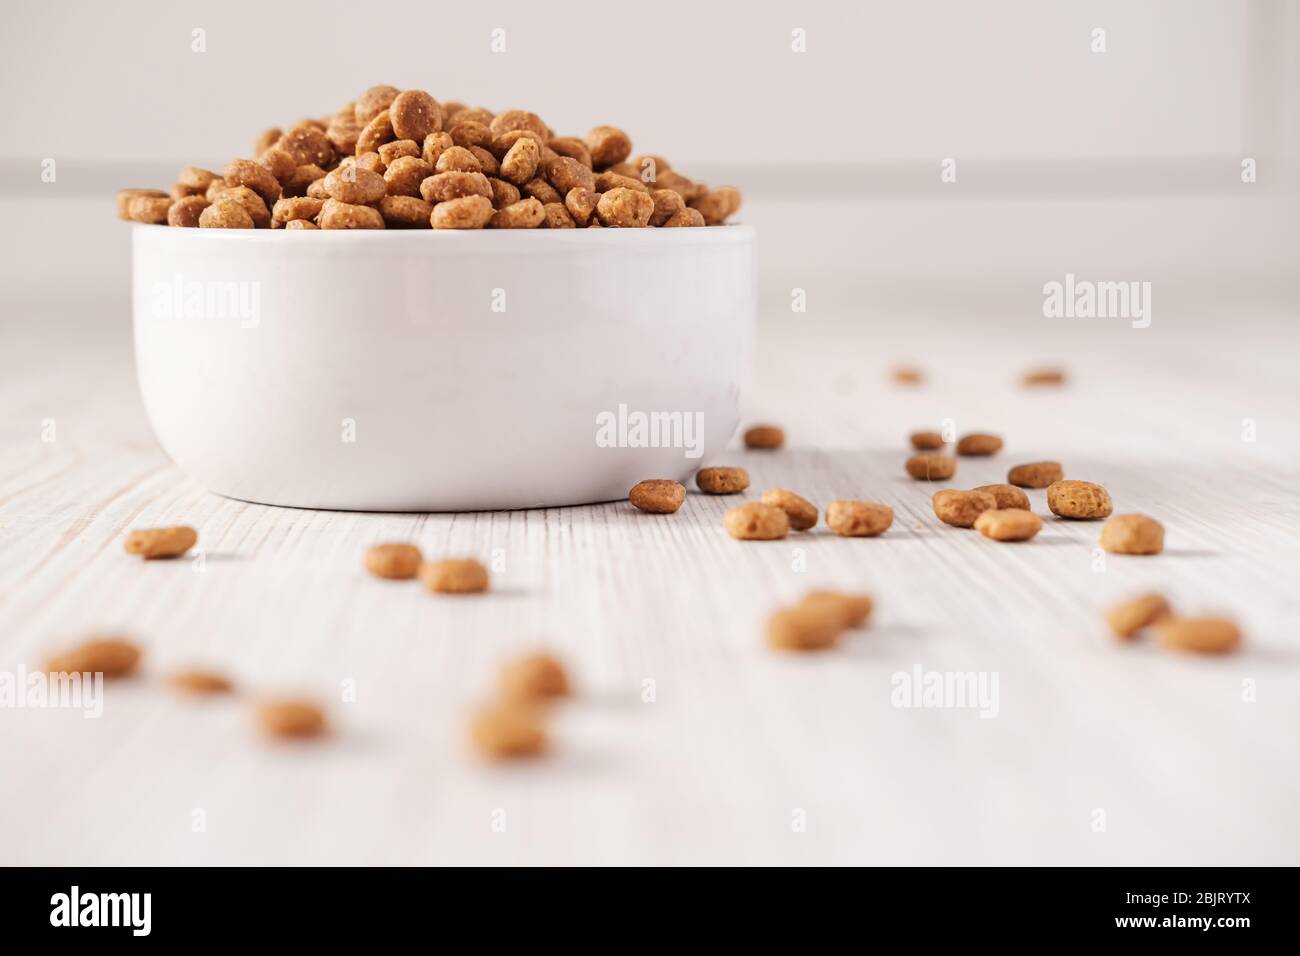 Dry pet food is in a white porcelain bowl and scattered on the floor. Close-up. Stock Photo